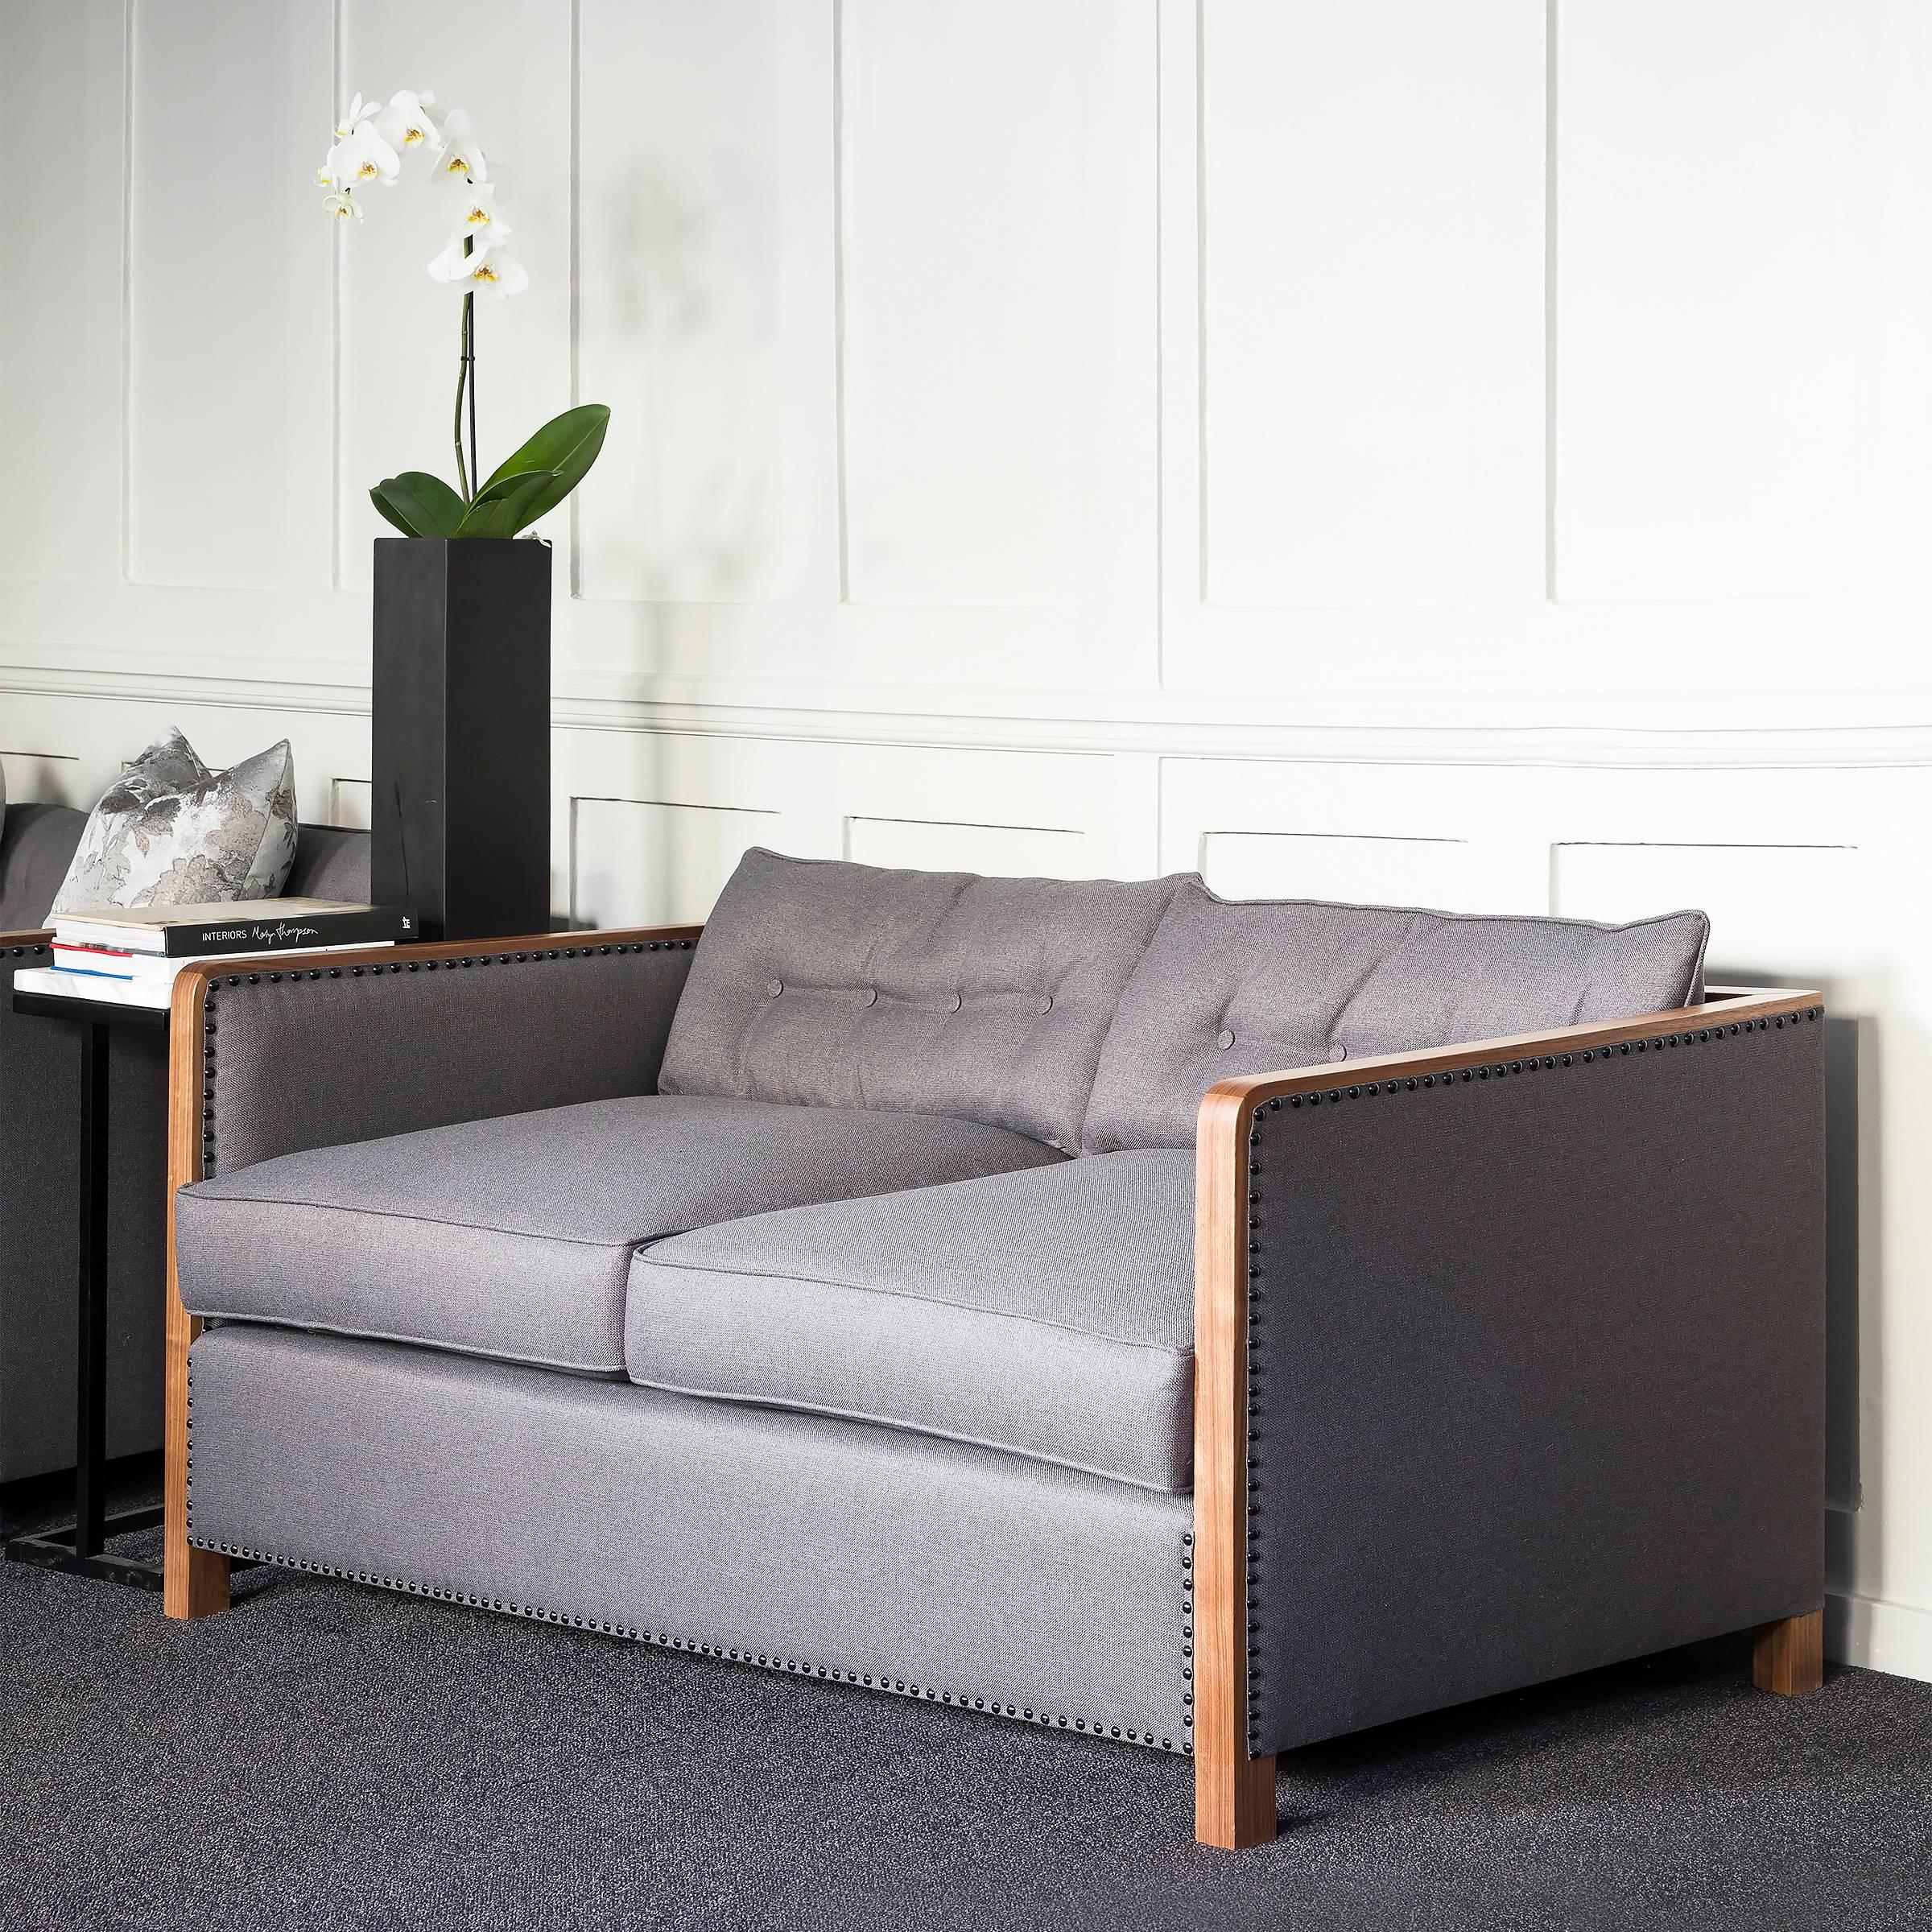 Utterly lounge worthy, the Bacco sofa design is a contemporary remodel of the iconic boxy chair.

Pushing the boundaries in design and playing around with different textures and finishes, the deconstructed Boxy Bacco sofa blends combines a chic mix